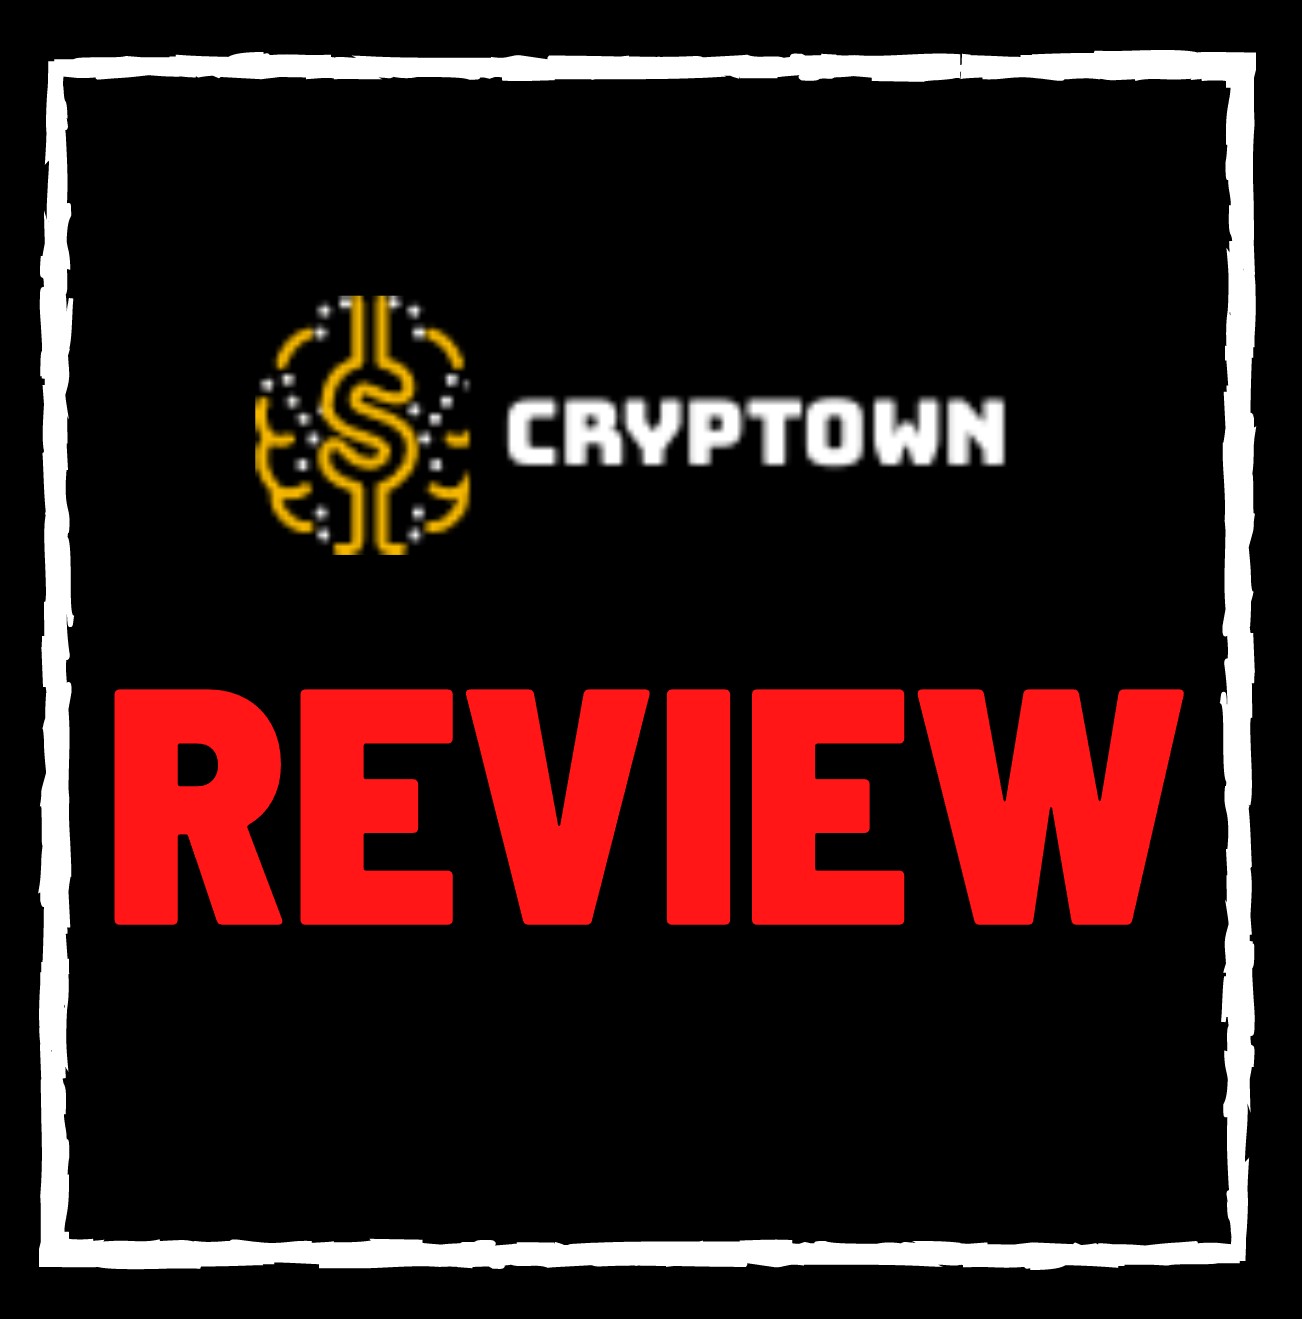 Cryptown.cc Review – Legit 17,000% Profit Crypto Company or Scam?